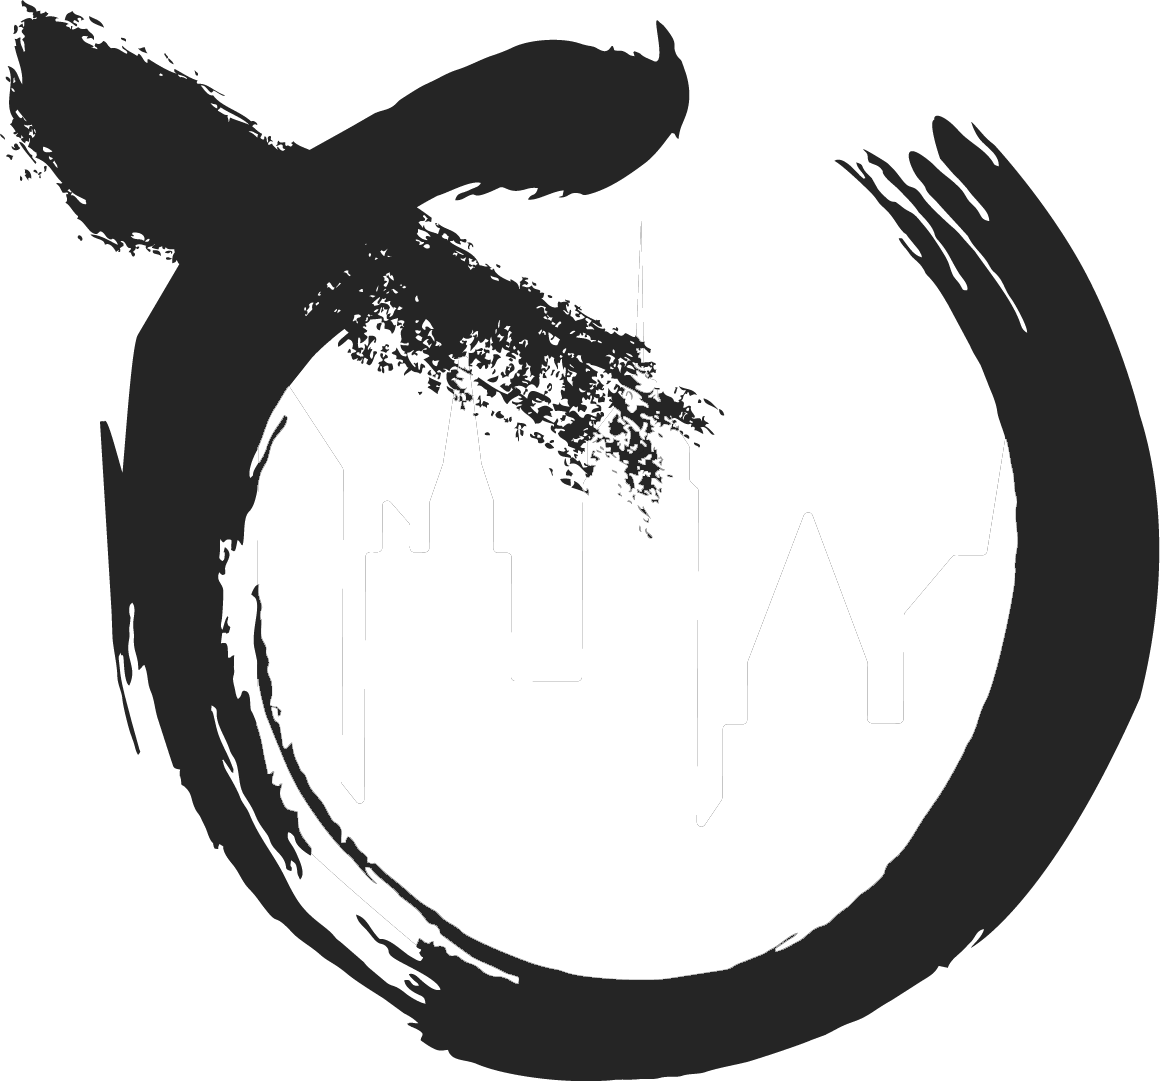 The Restoration Place logo: a black and white brush stroke in a circle on a white background .